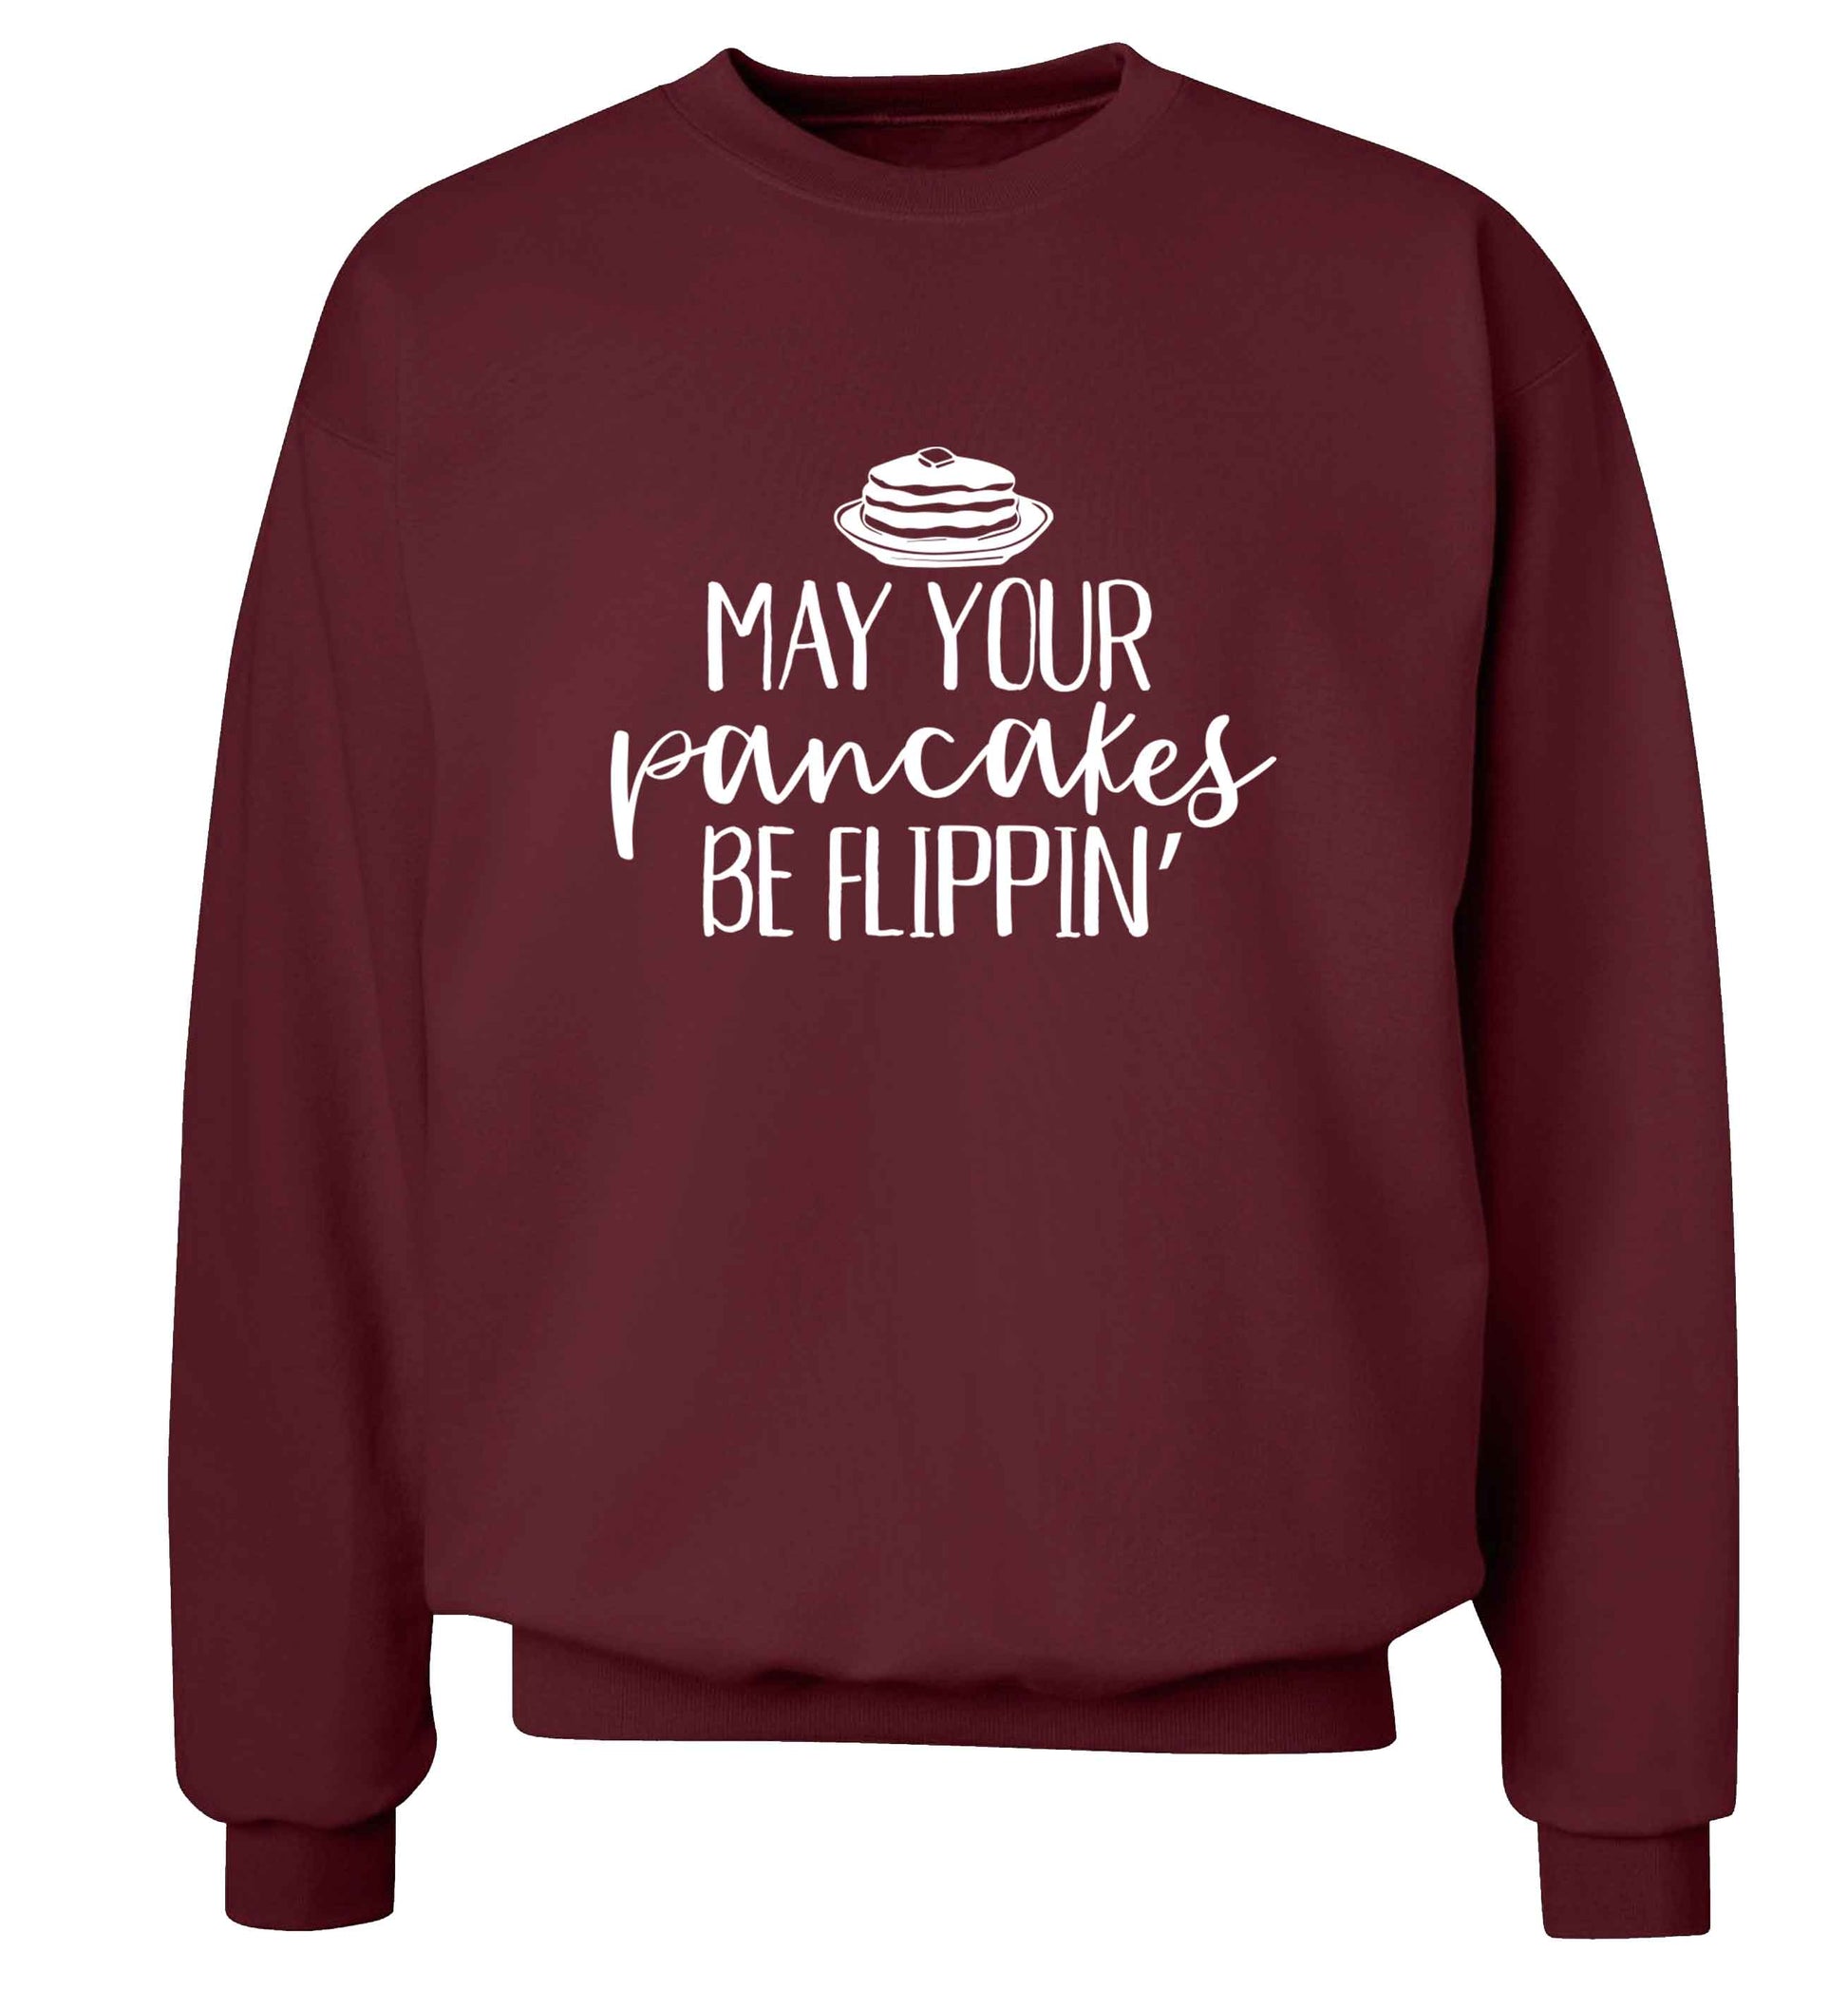 May your pancakes be flippin' adult's unisex maroon sweater 2XL